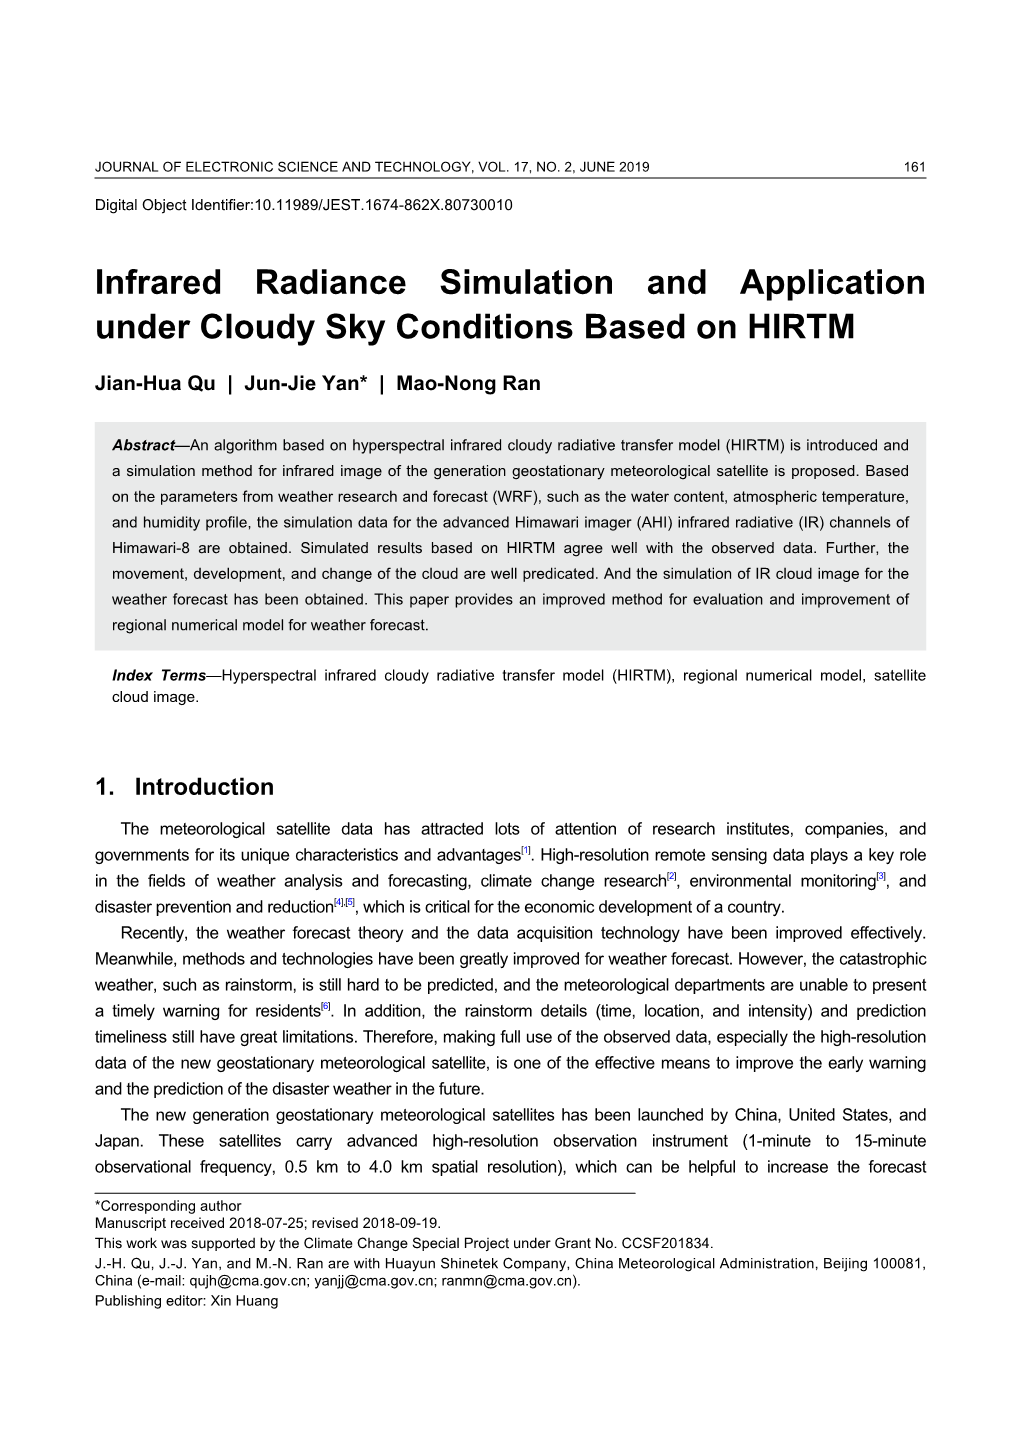 Infrared Radiance Simulation and Application Under Cloudy Sky Conditions Based on HIRTM